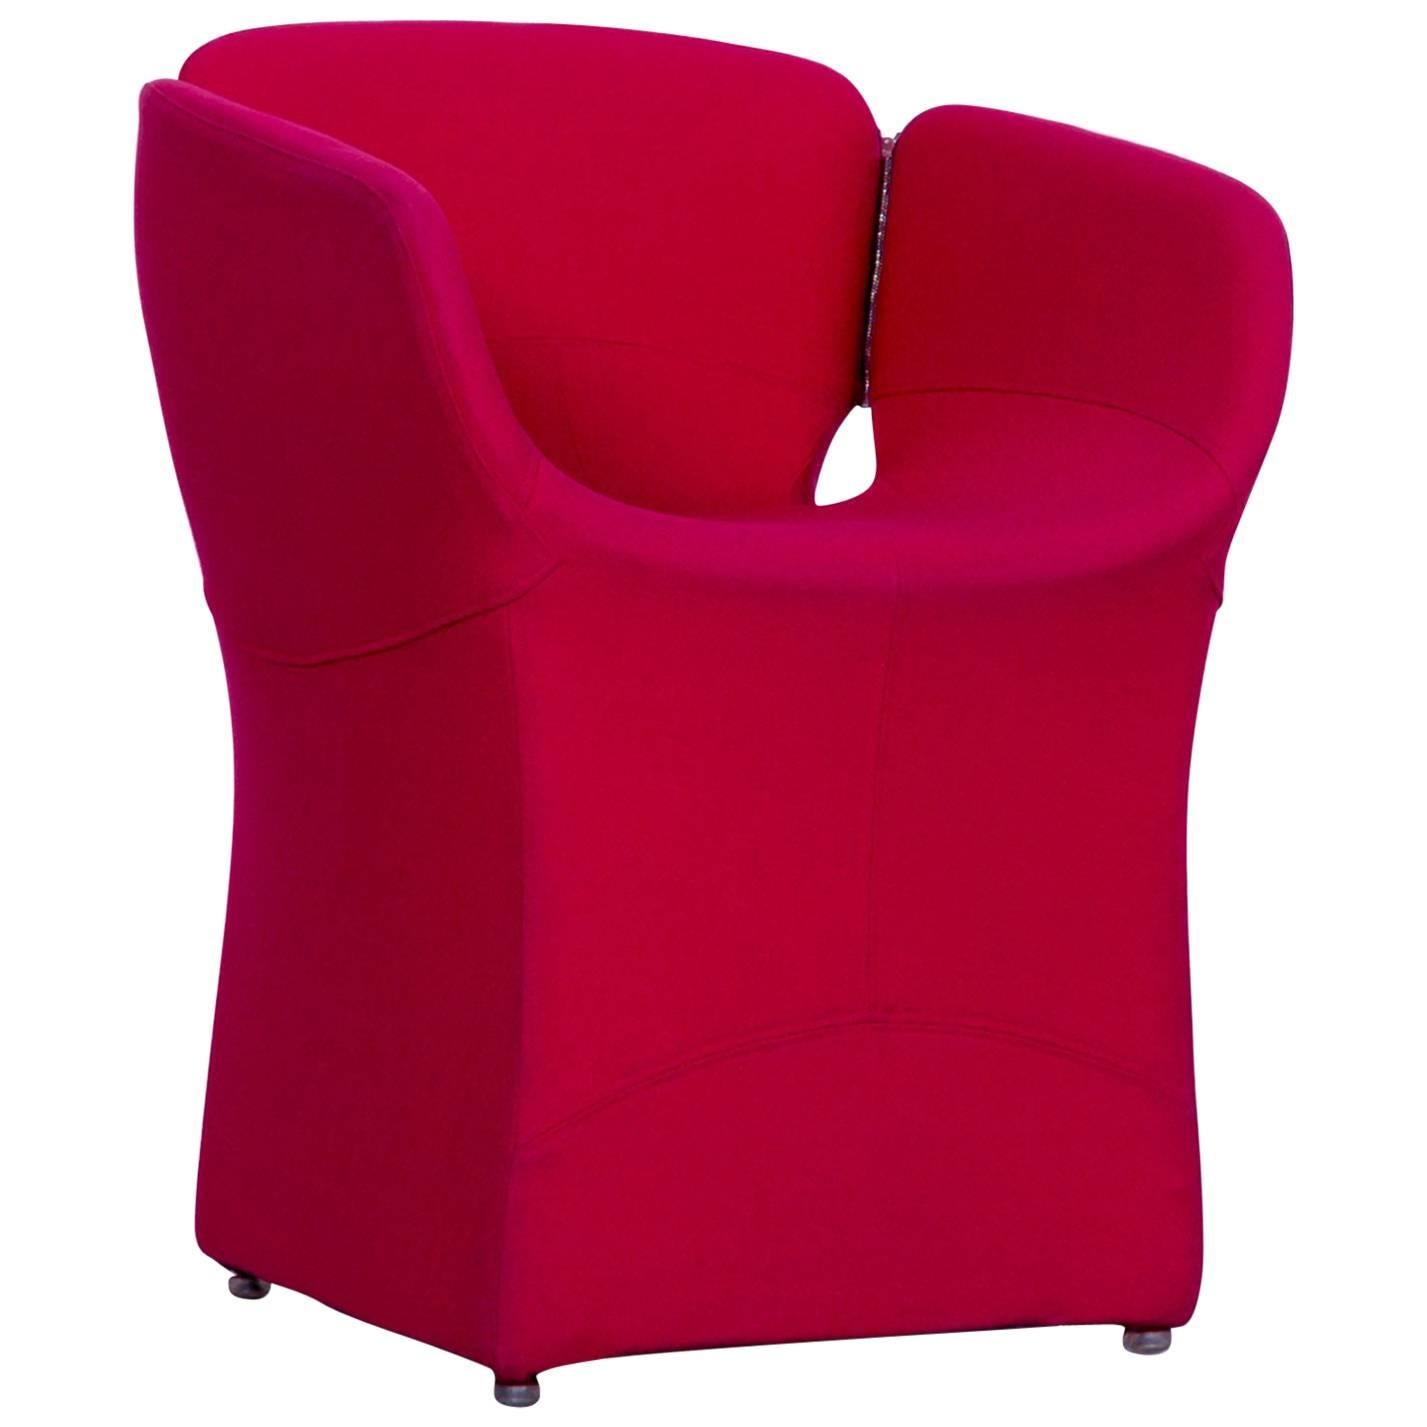 Moroso Bloomy Designer Chair in High Quality Red Fabric by Patricia Urquiola